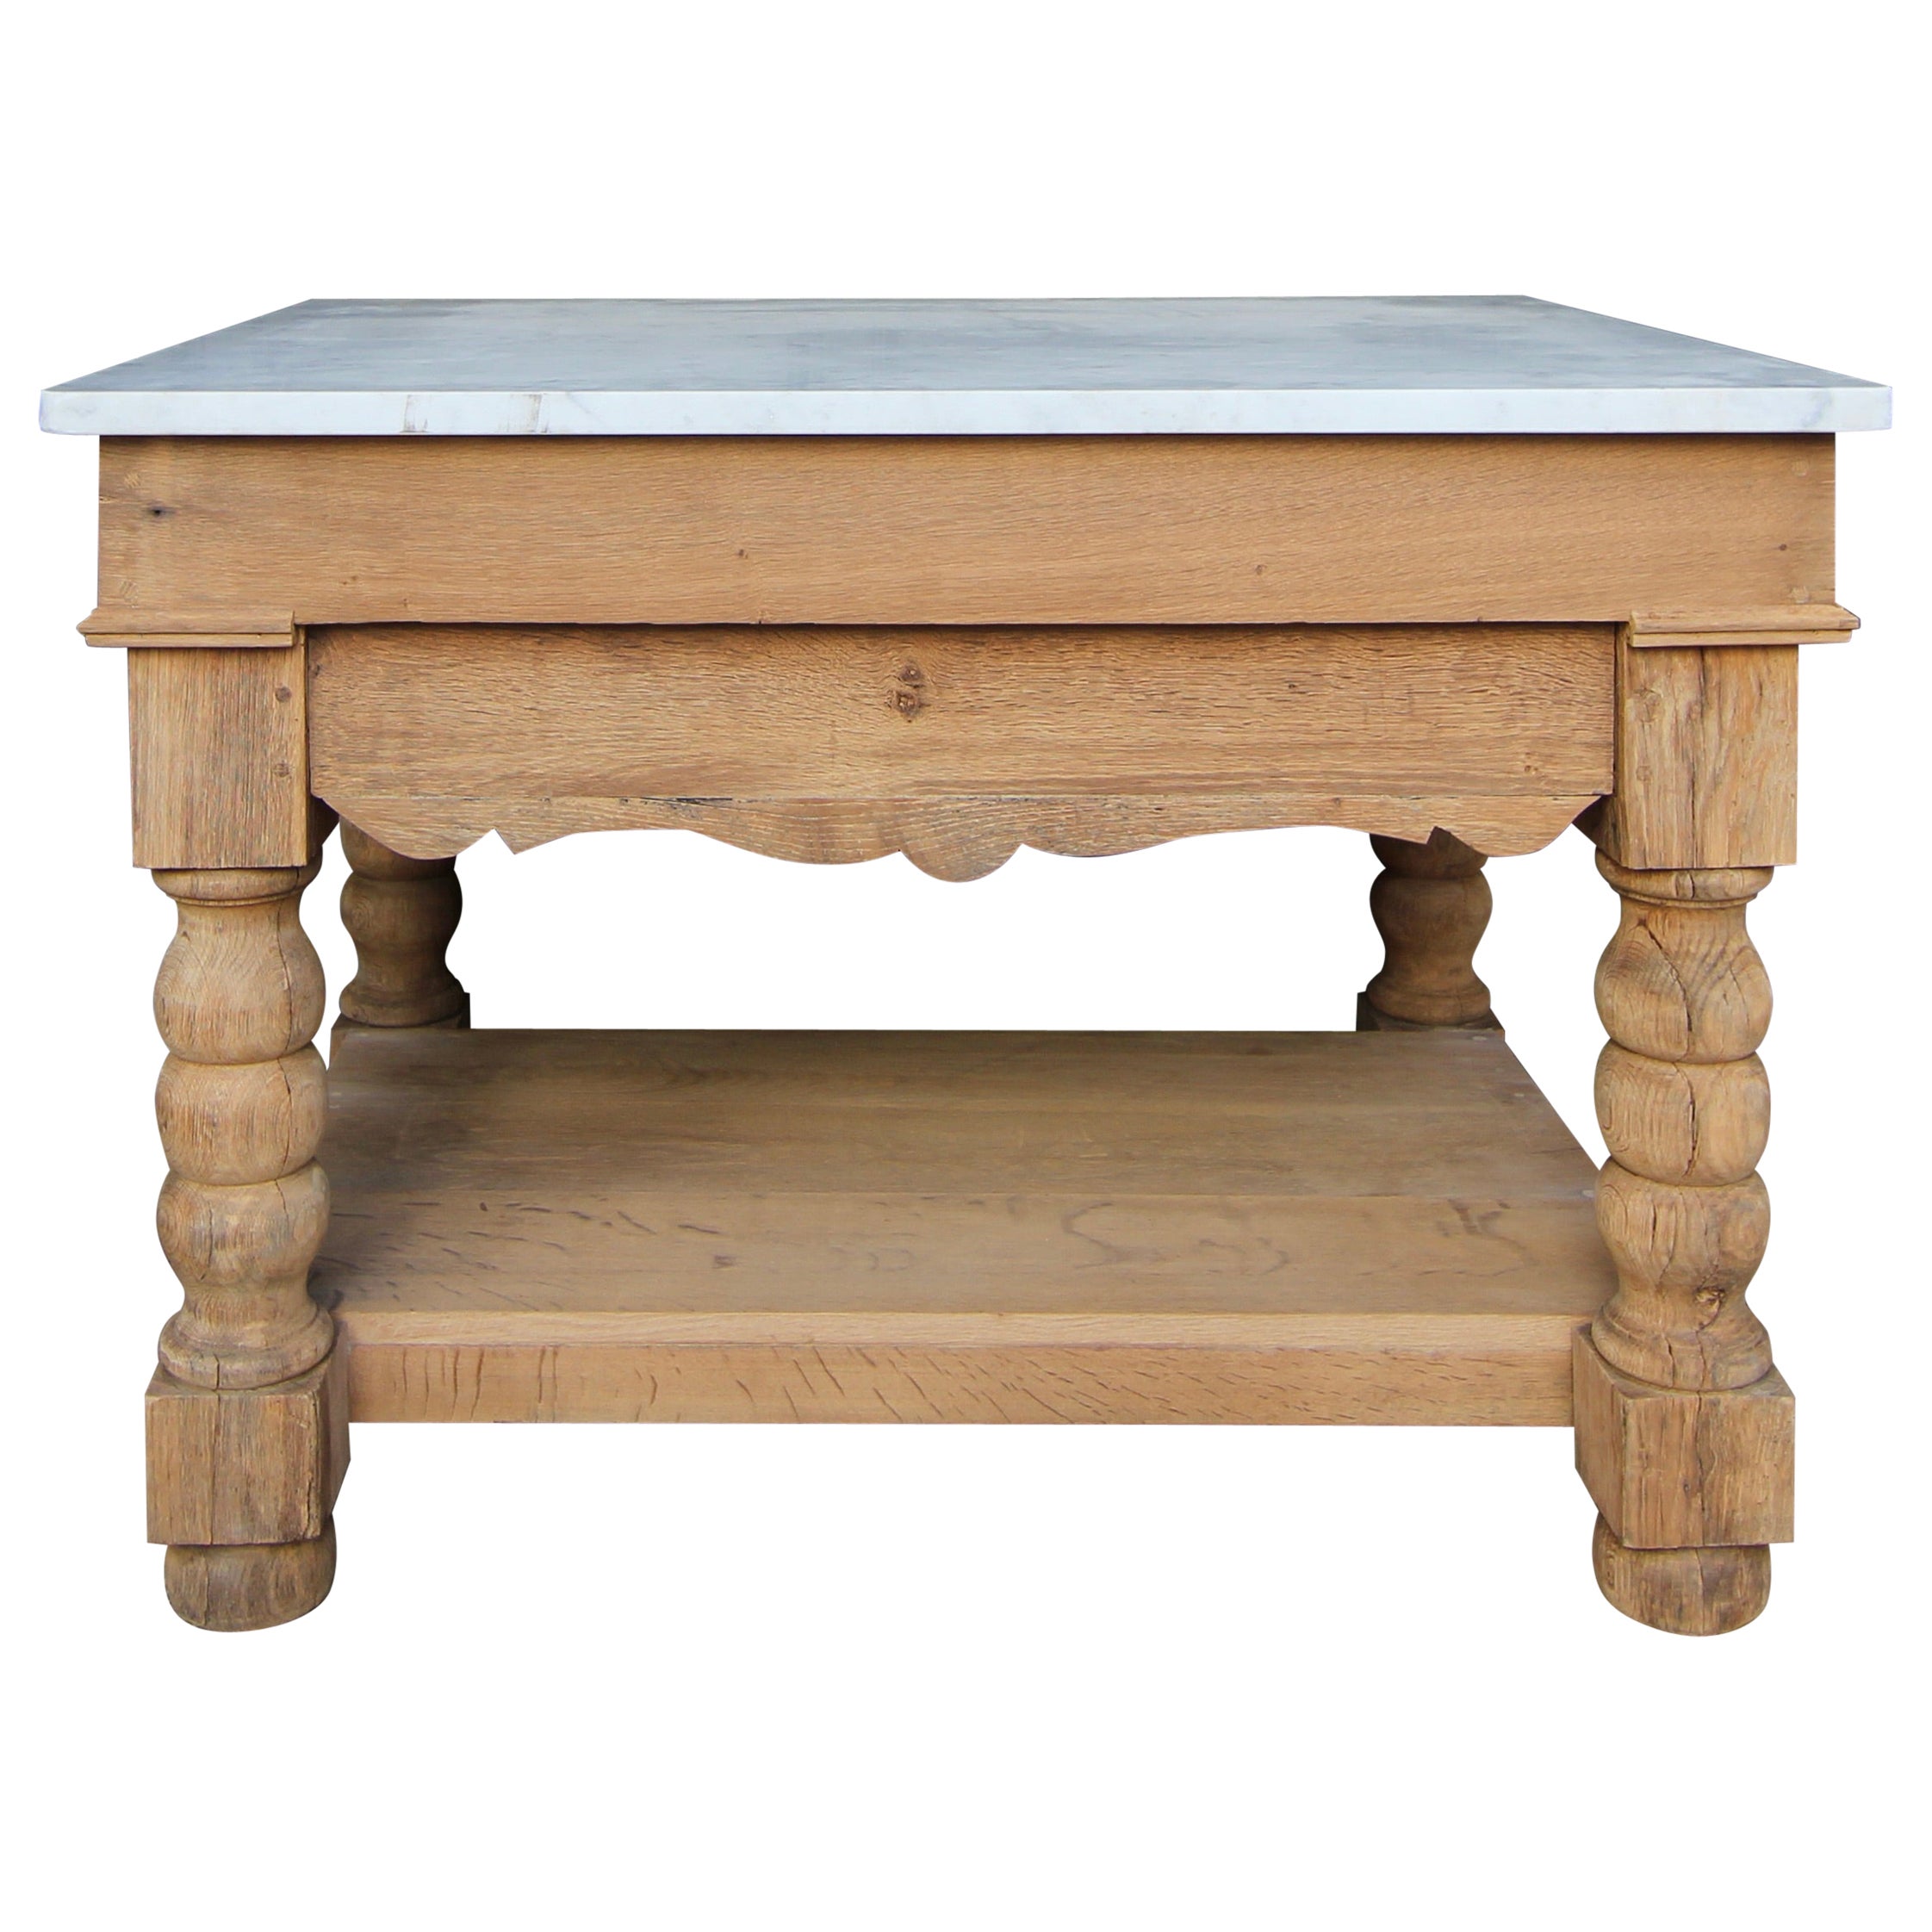 Kitchen Prep Table or Kitchen Island Made of Oak and Carrara Marble